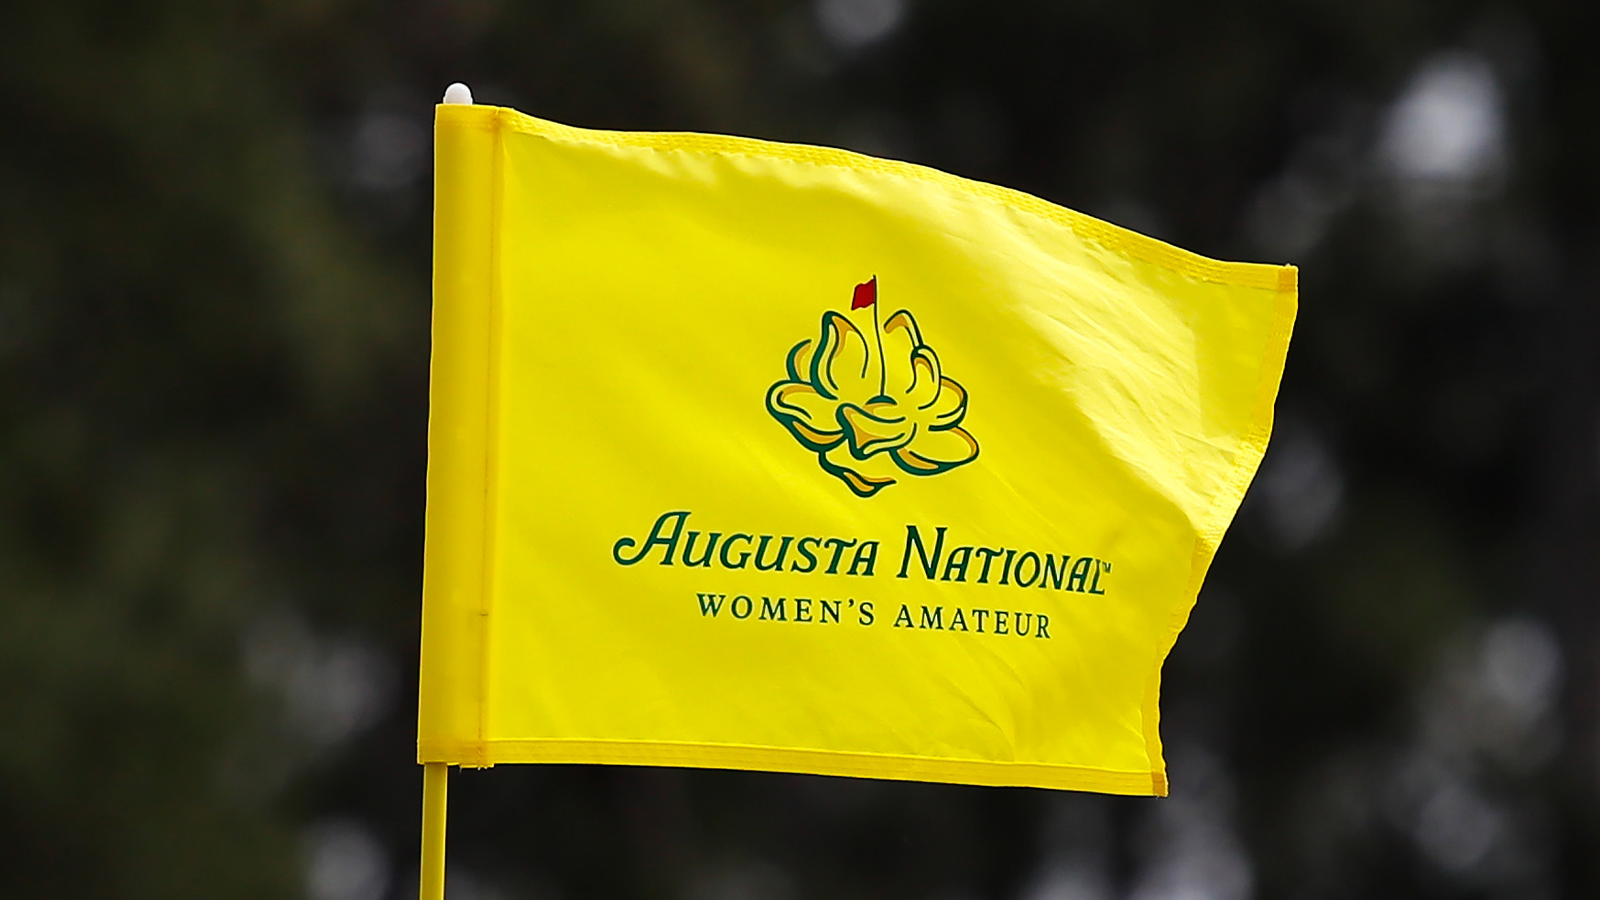 A pin flag is displayed during the final round of the Augusta National Women's Amateur at Augusta National Golf Club 